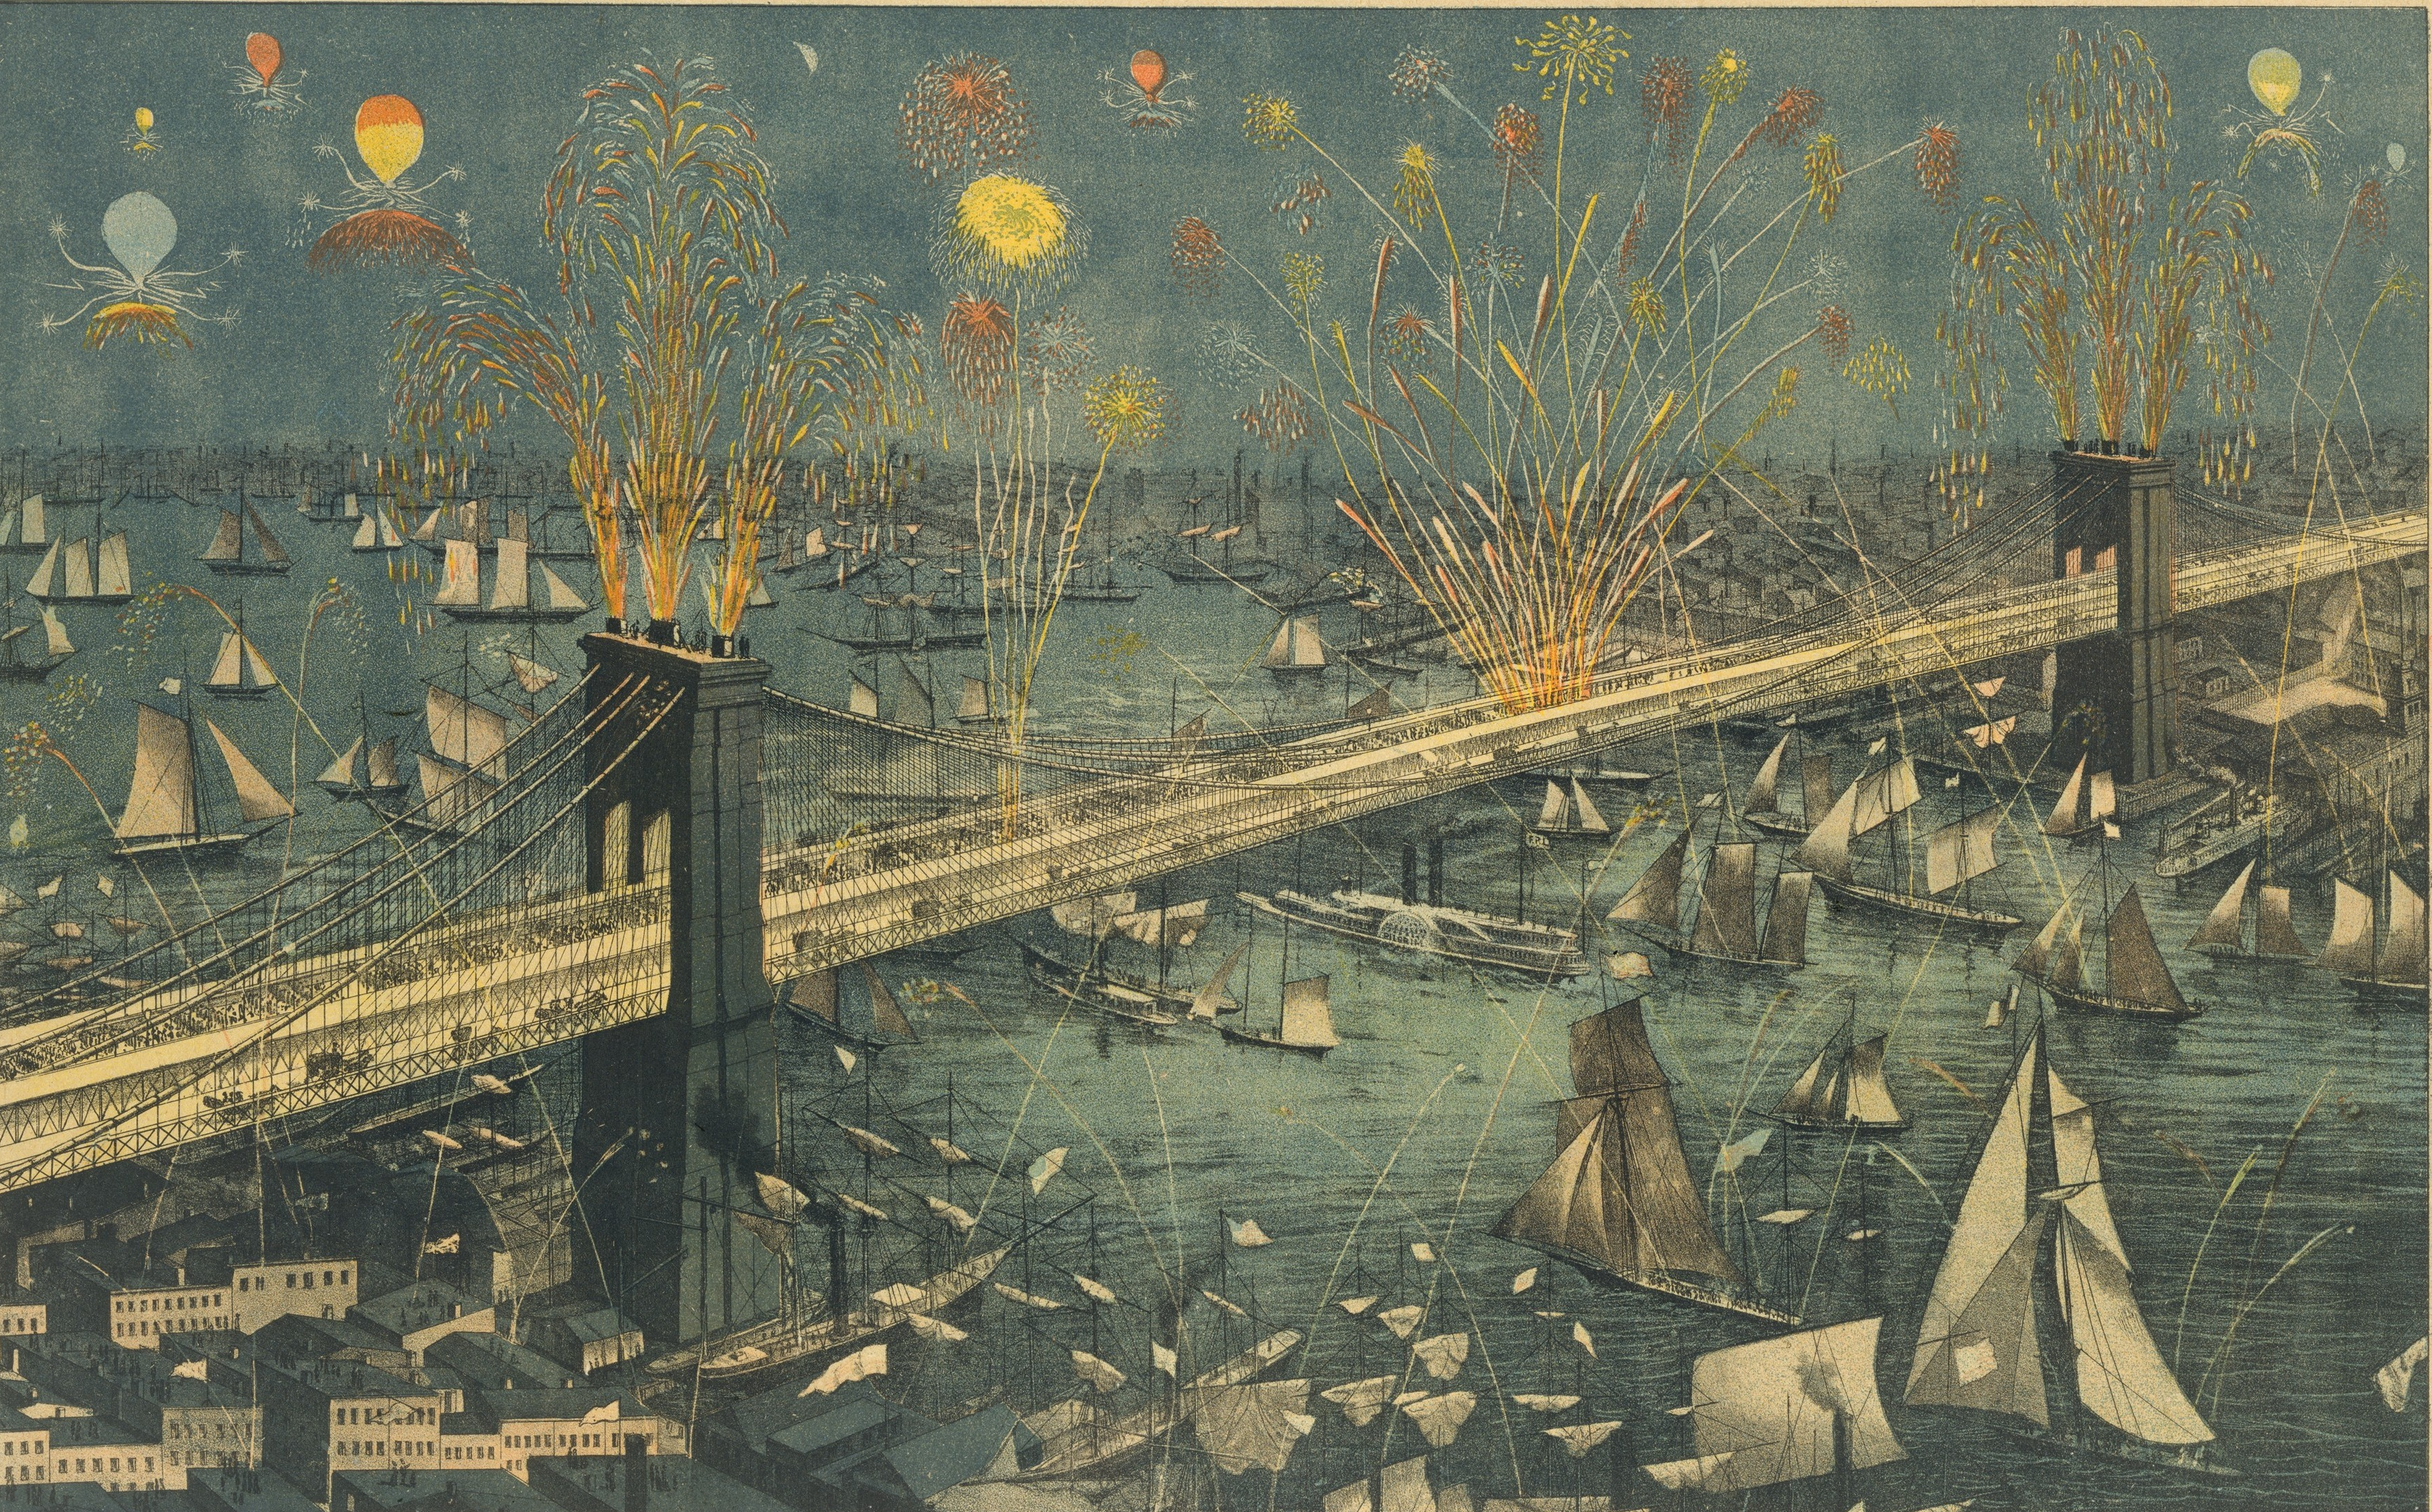 View of the Great New York and Brooklyn Bridge, Display of Fireworks on Opening Night by Unknown Artist - 1883 - 38.9 x 62.4 cm Metropolitan Museum of Art